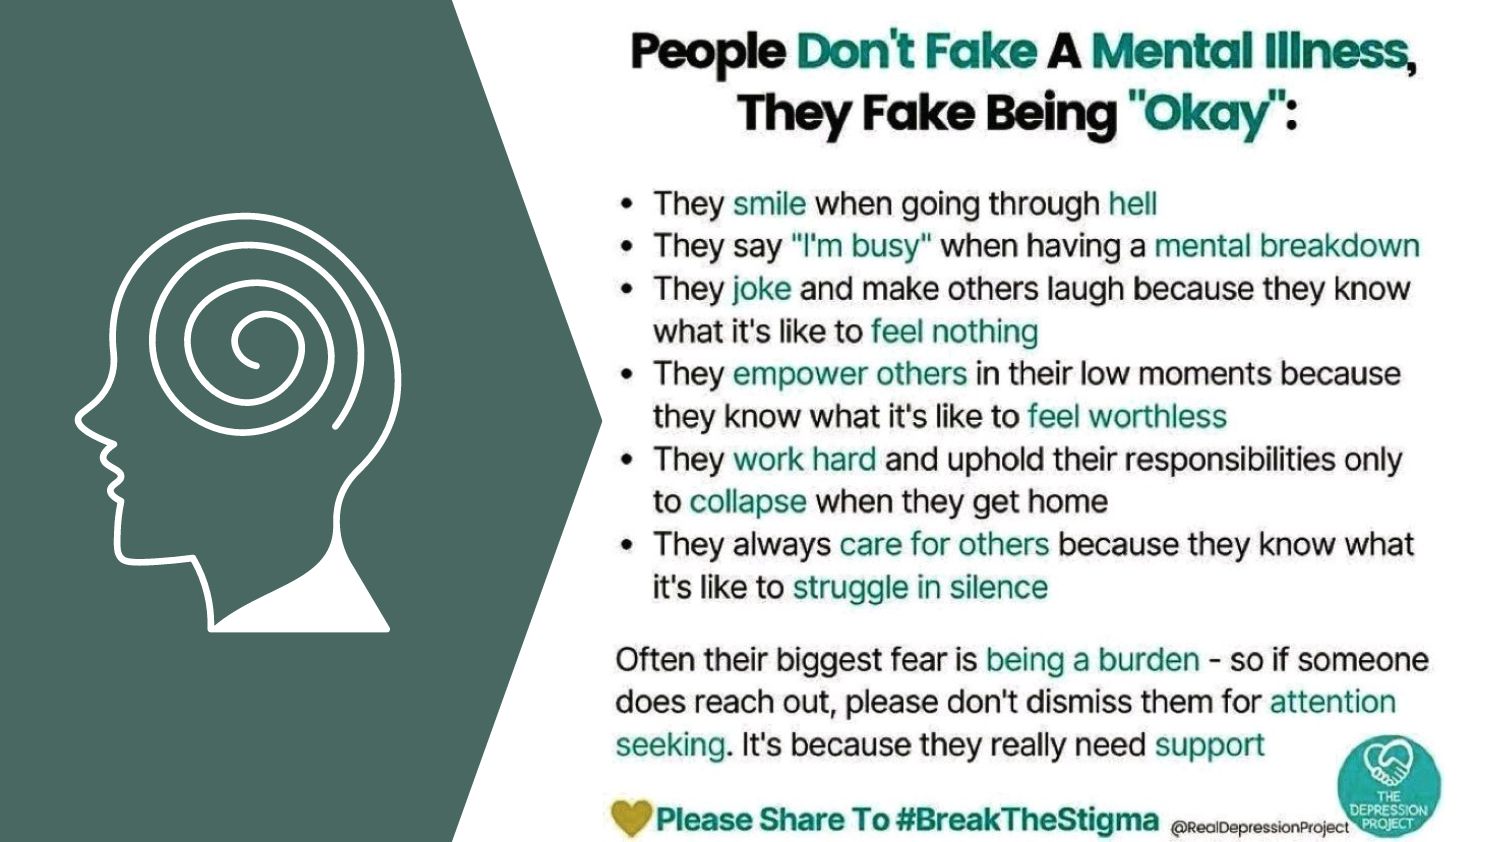 People Don't Fake A Mental Illness, They Fake Being "Okay":